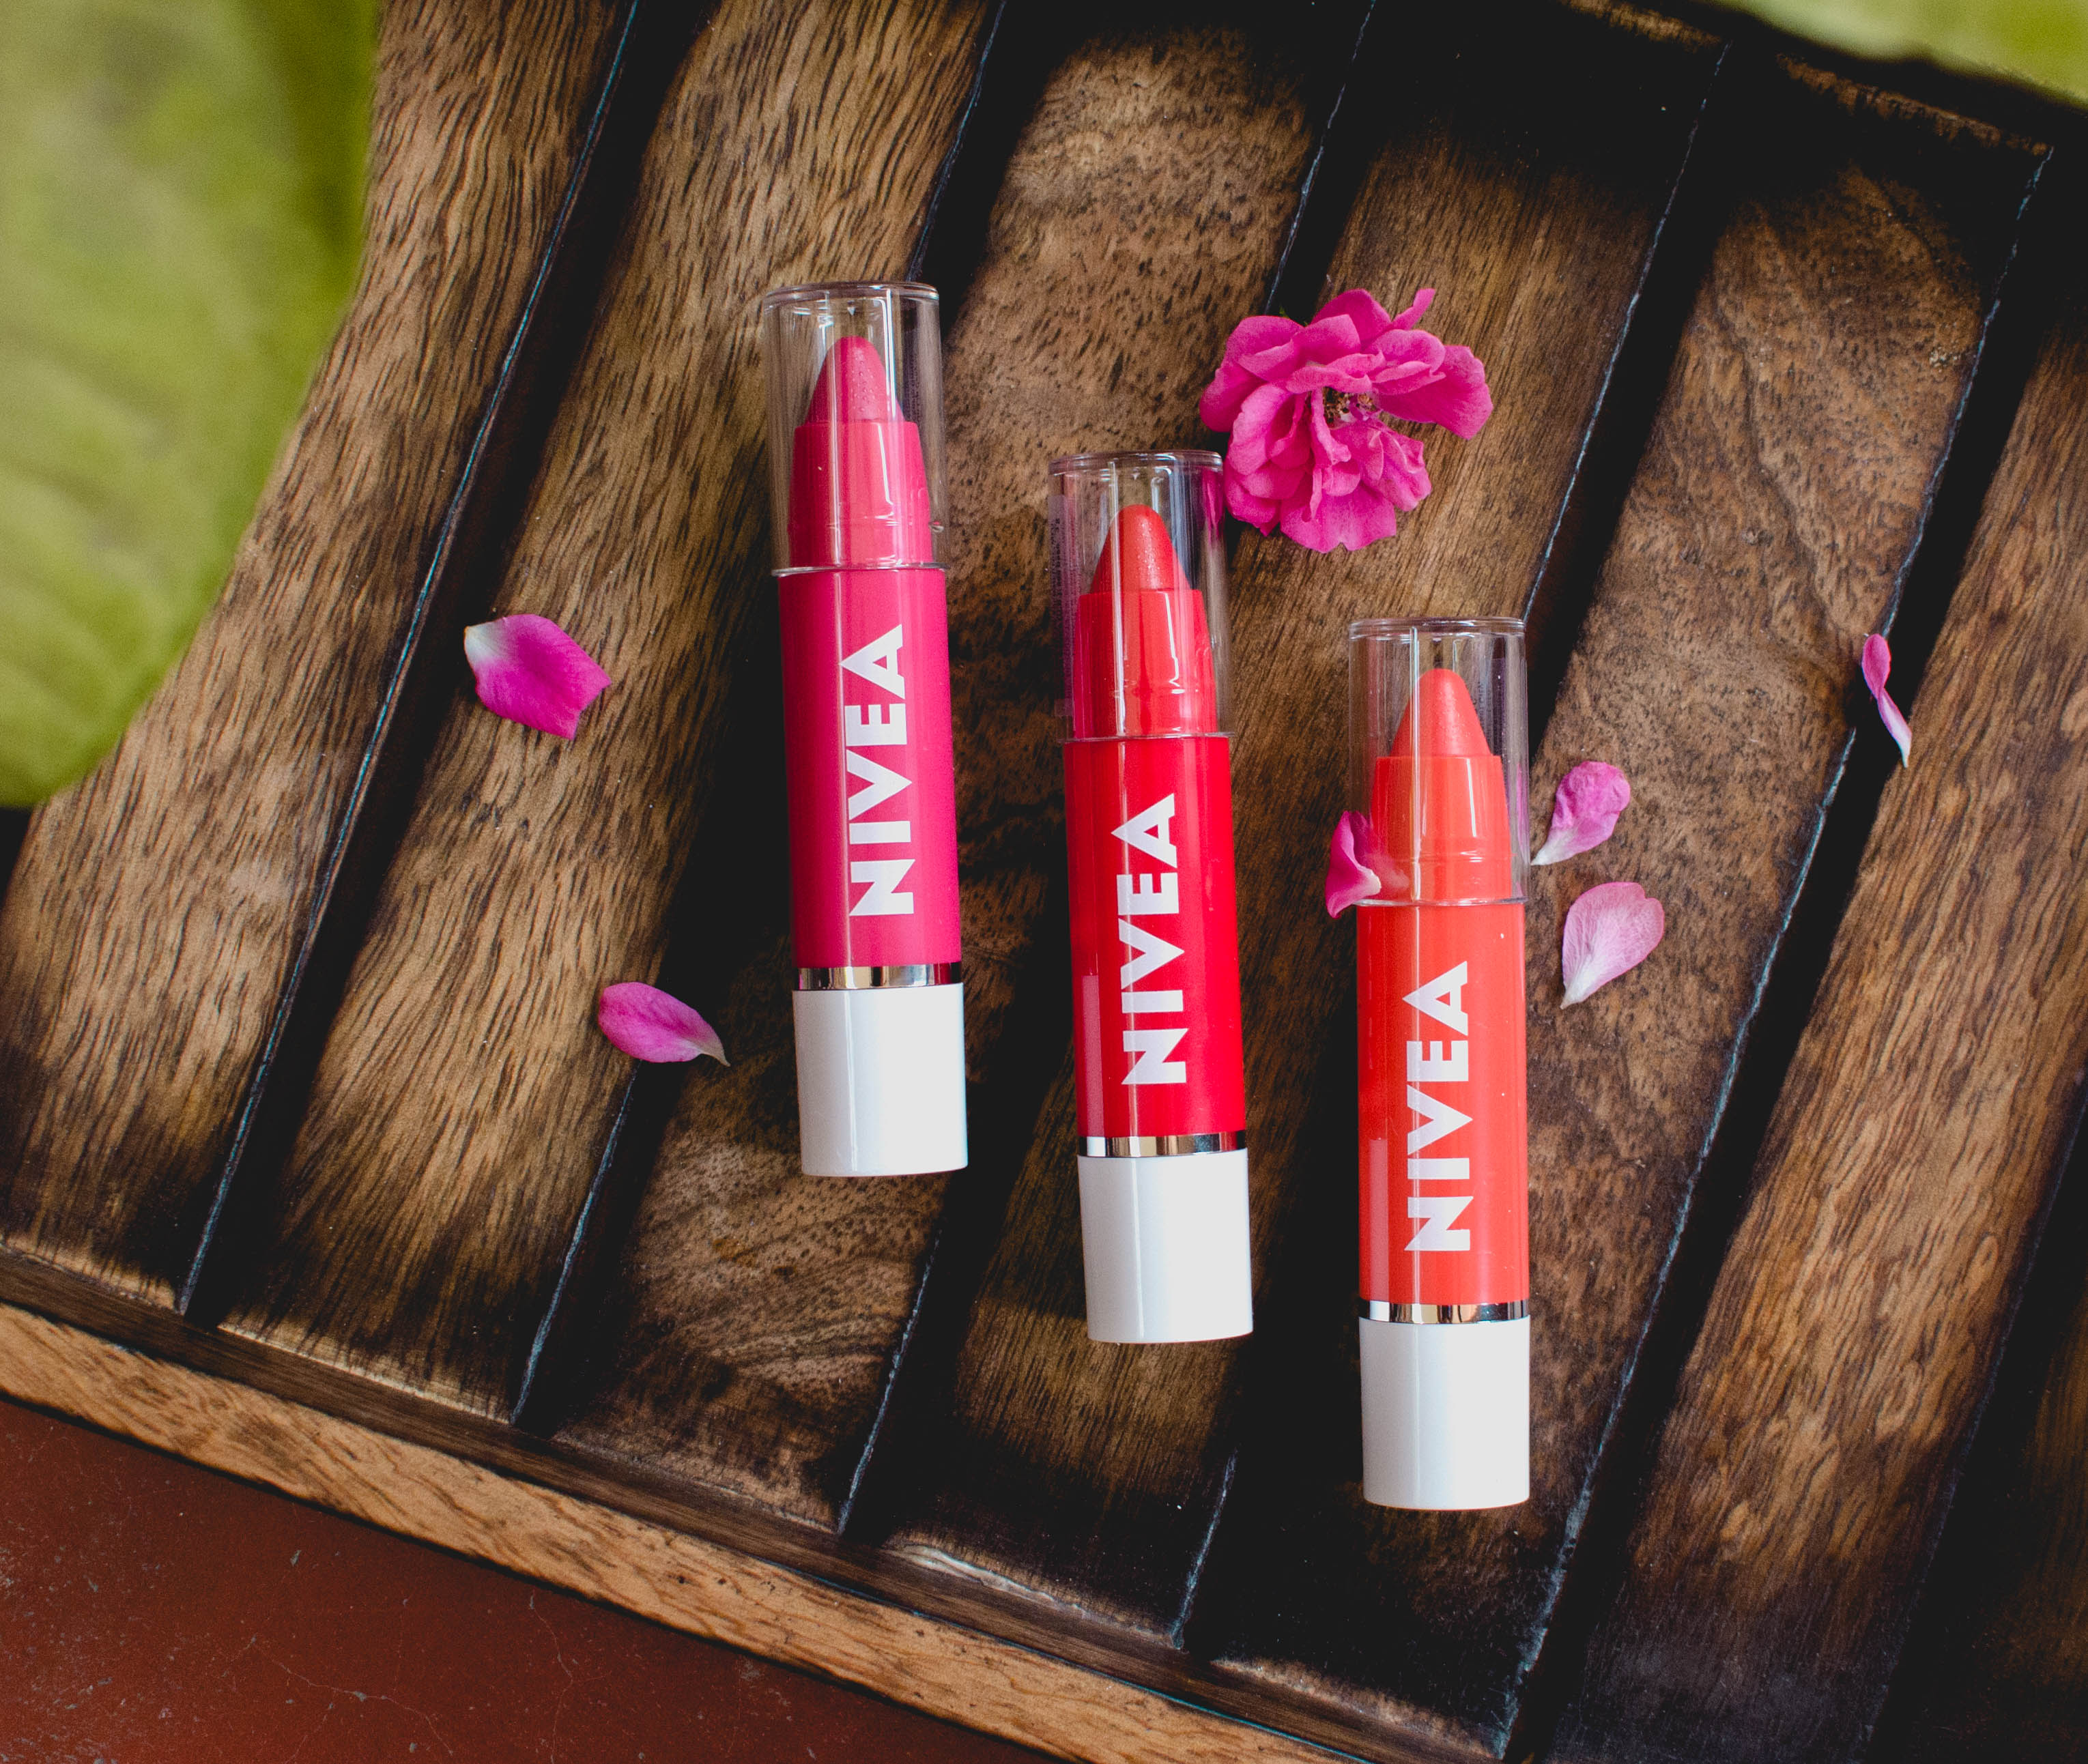 Nivea Coloron Lip Crayons Review and Swatches | Cherry On Top